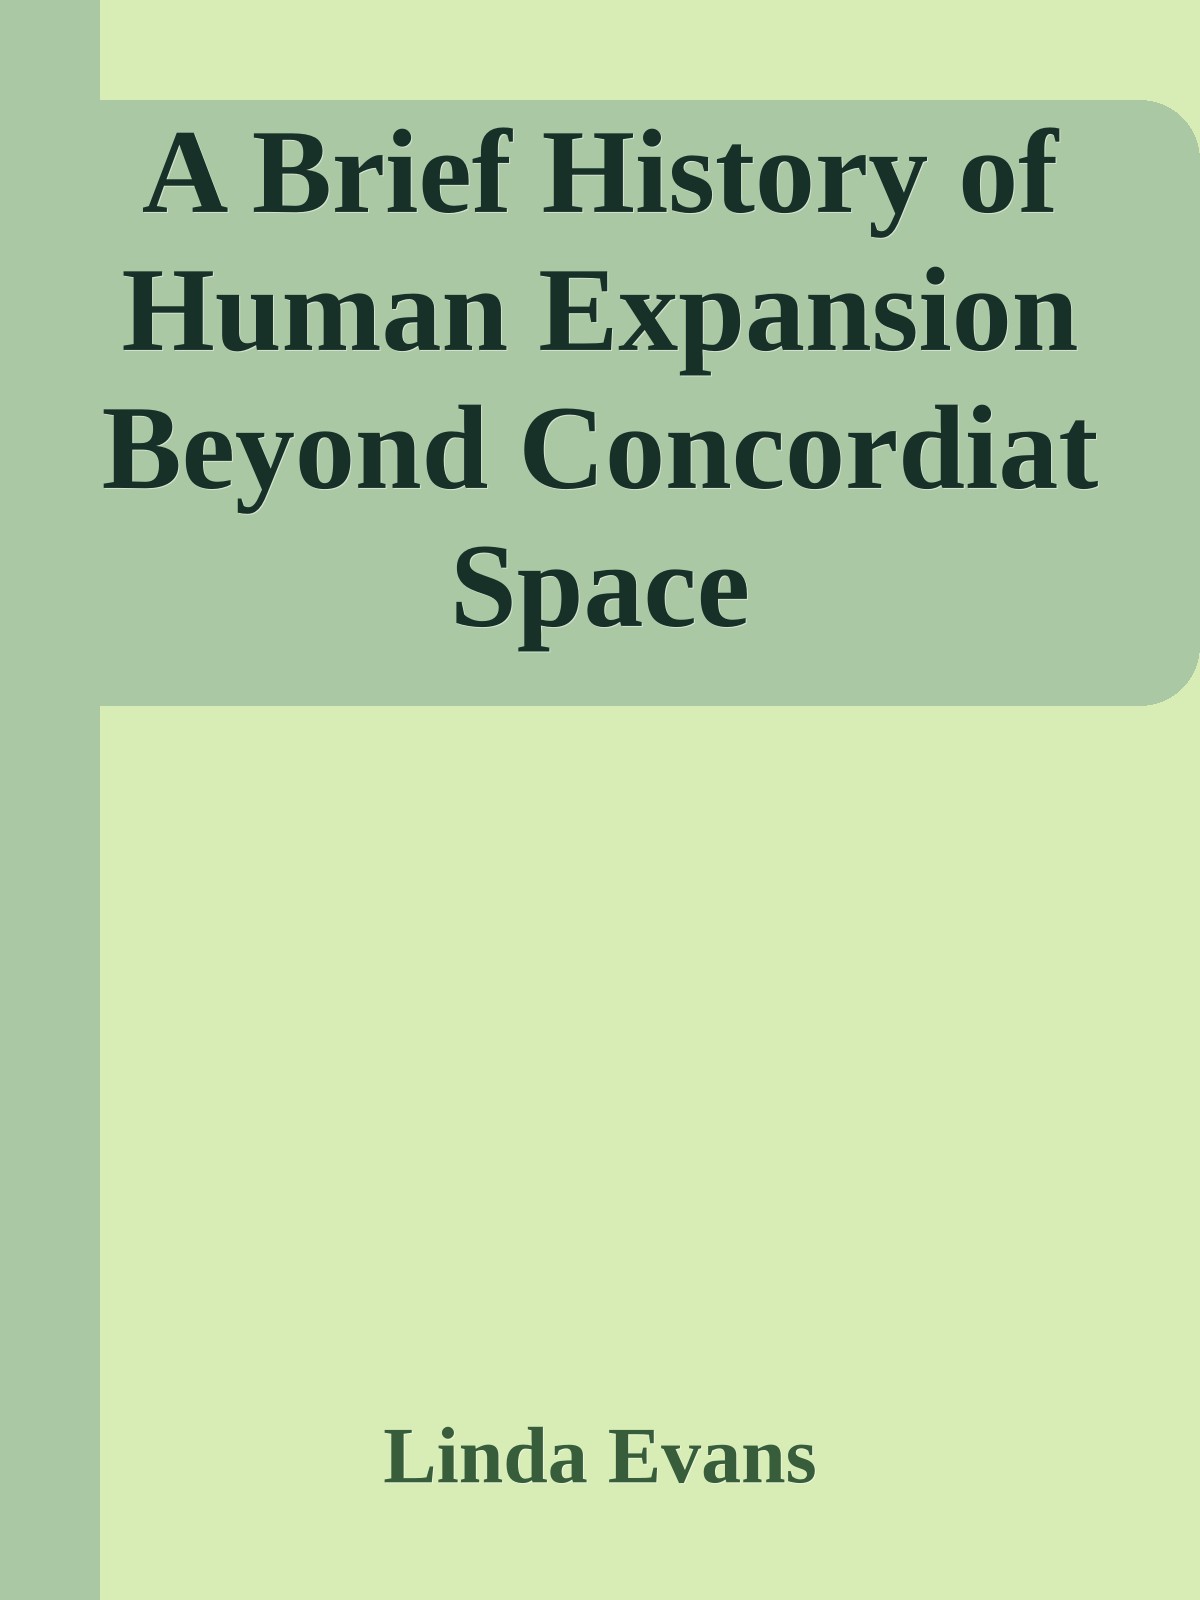 A Brief History of Human Expansion Beyond Concordiat Space